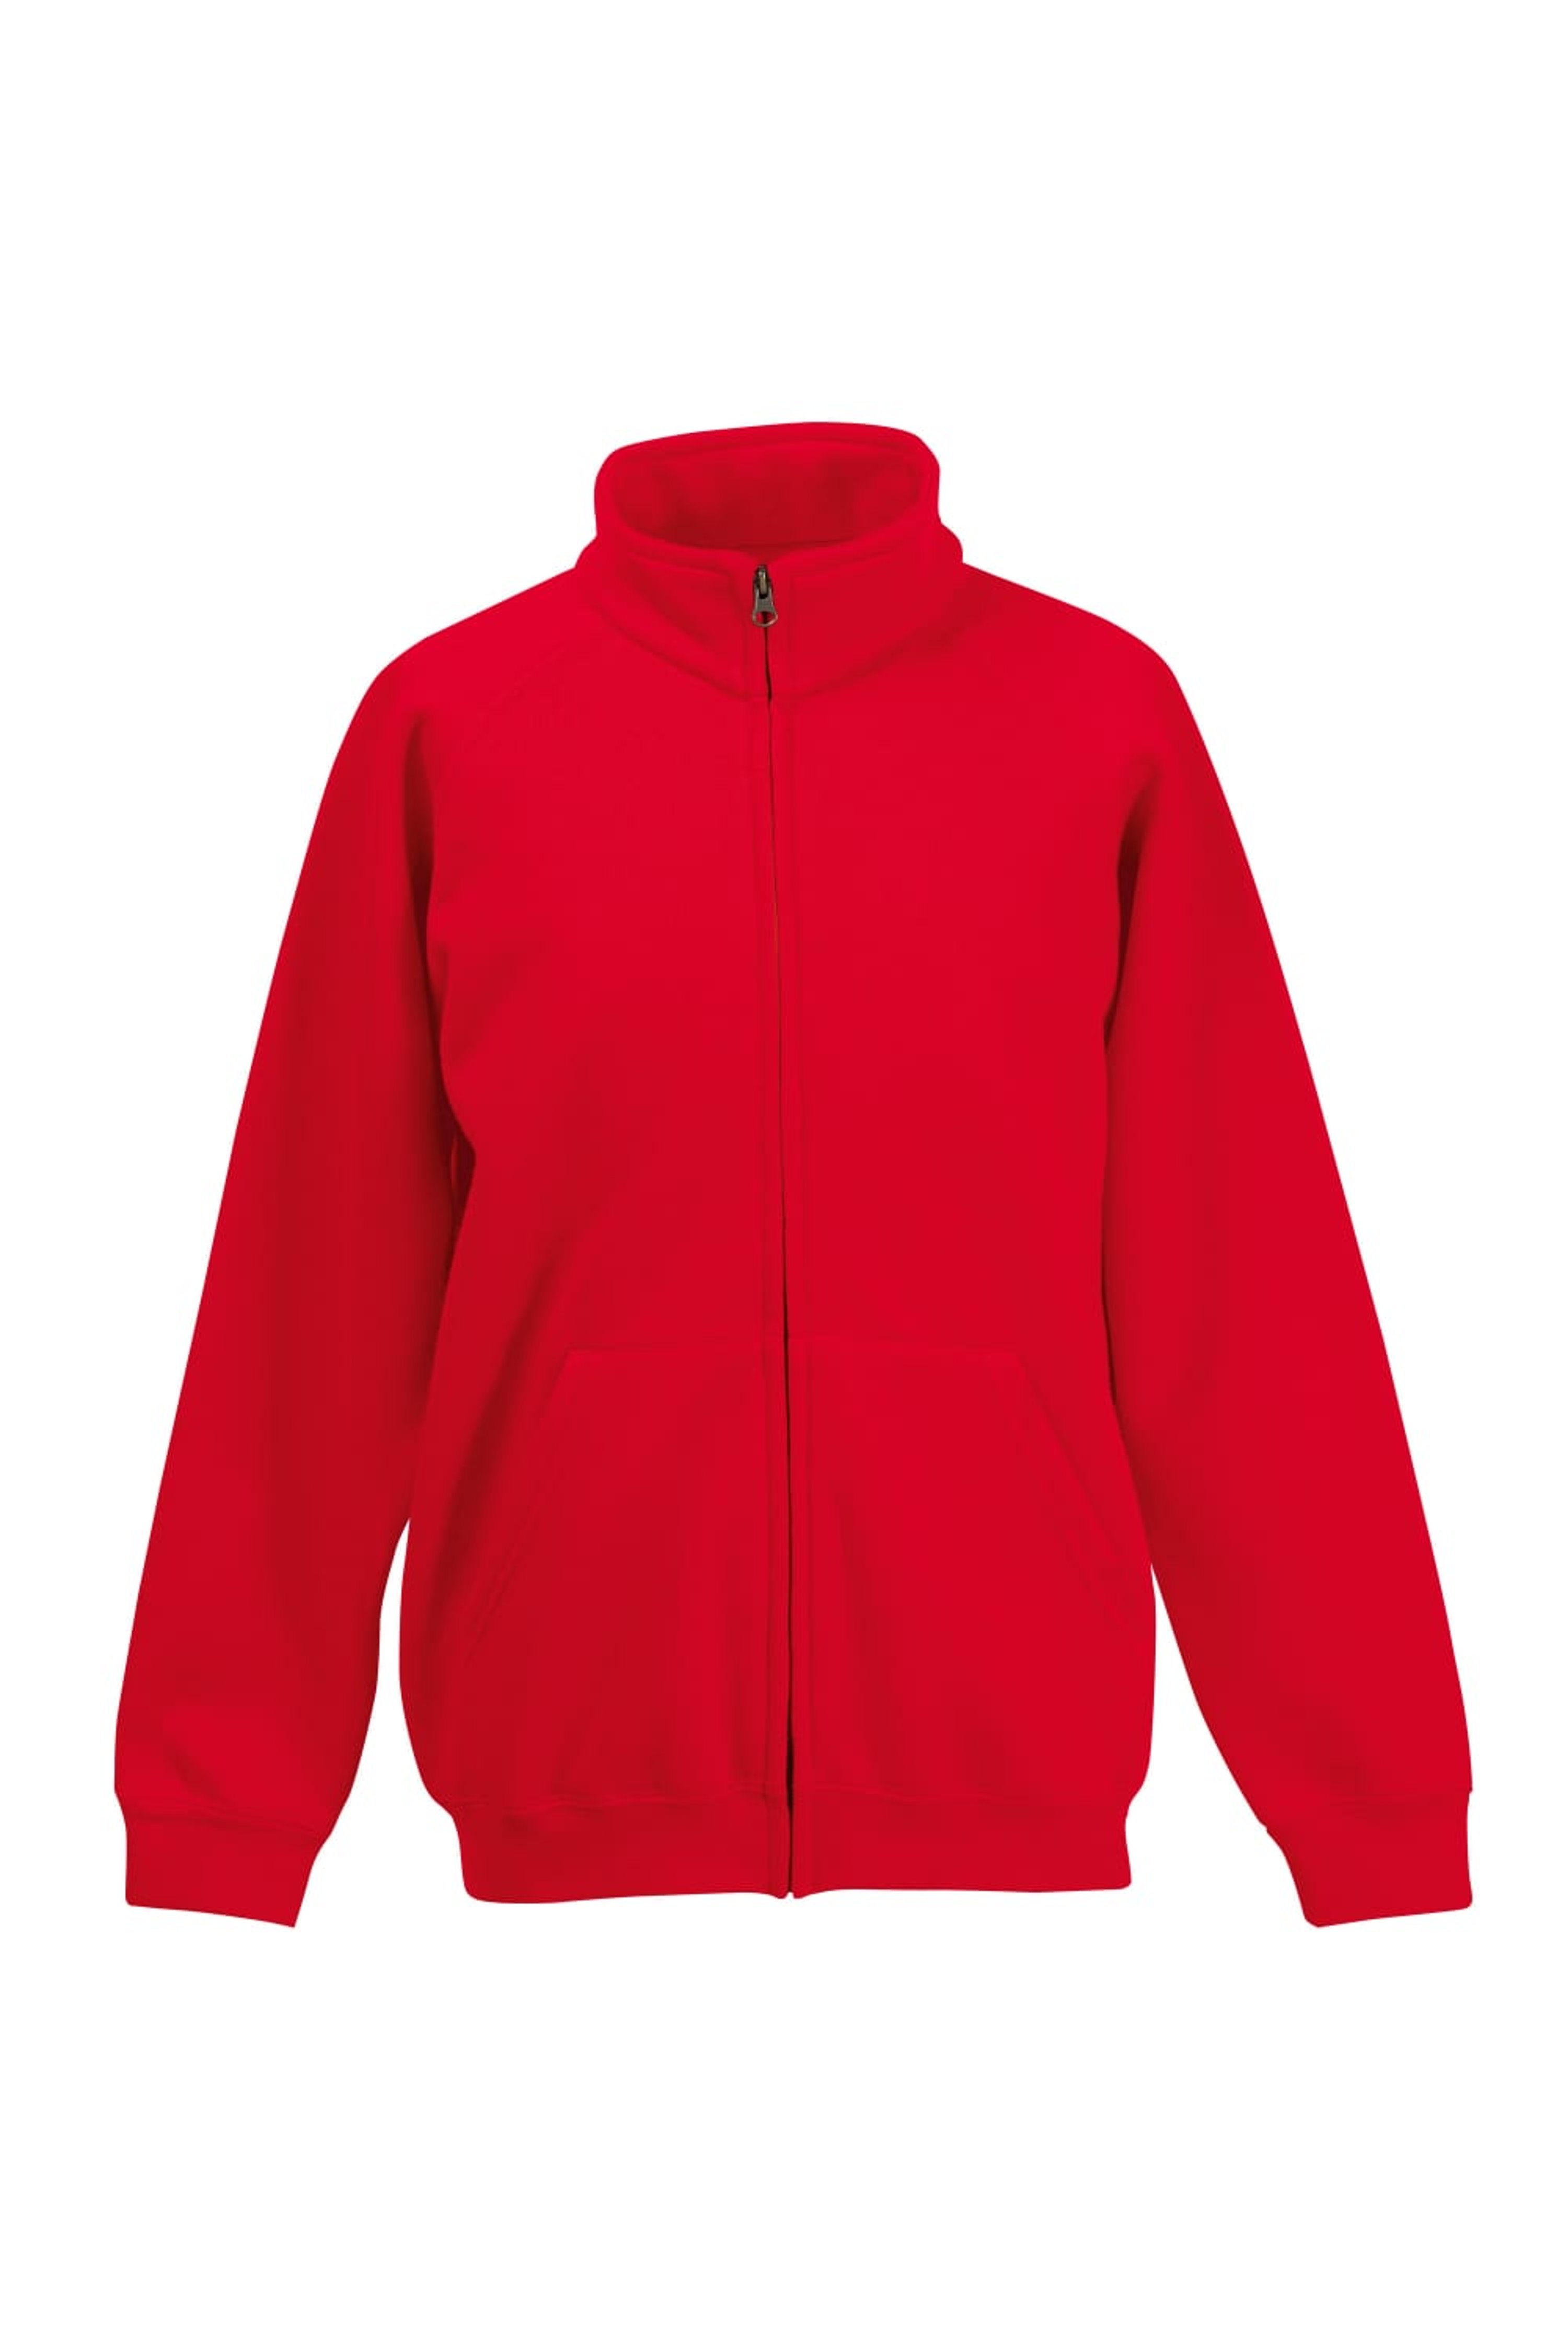 FRUIT OF THE LOOM FRUIT OF THE LOOM FRUIT OF THE LOOM CHILDRENS/KIDS UNISEX POLY-COTTON SWEAT JACKET (RED)